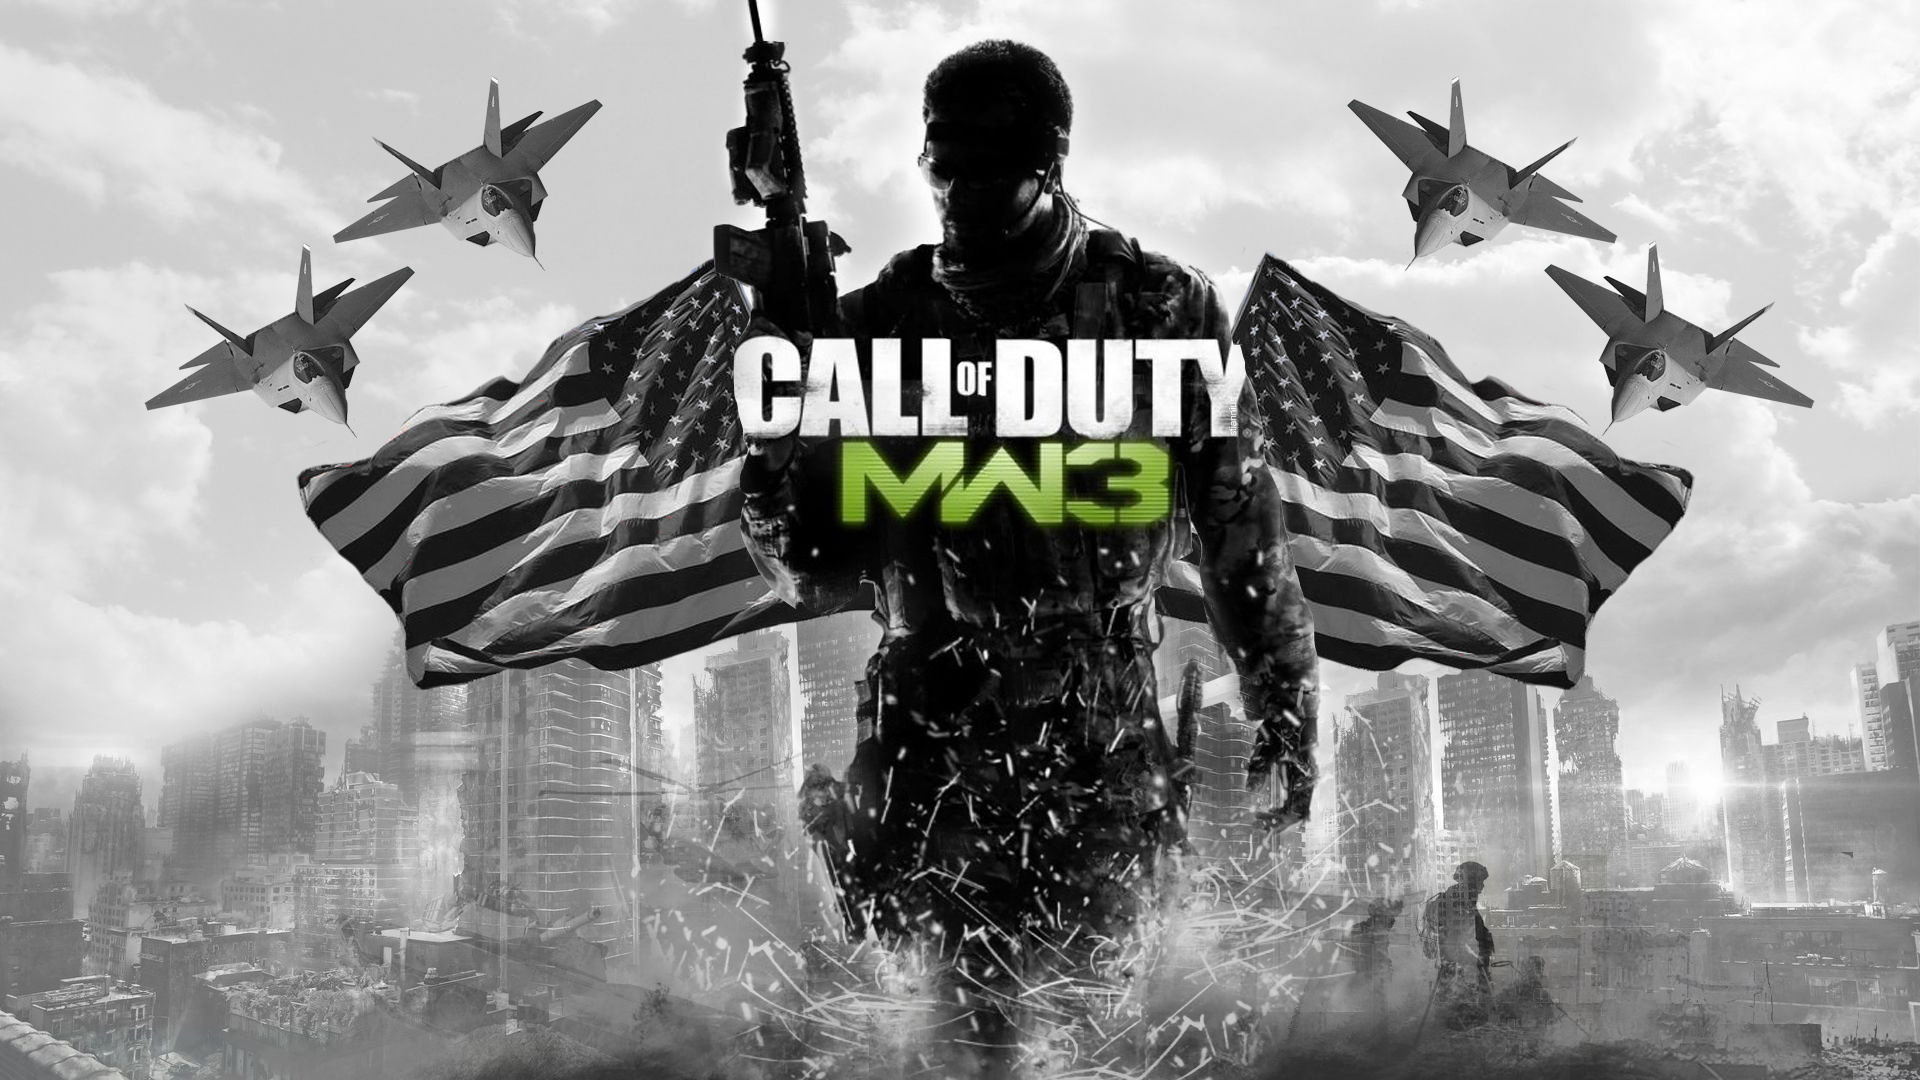 Call Of Duty: Modern Warfare 3 Backgrounds, Compatible - PC, Mobile, Gadgets| 1920x1080 px